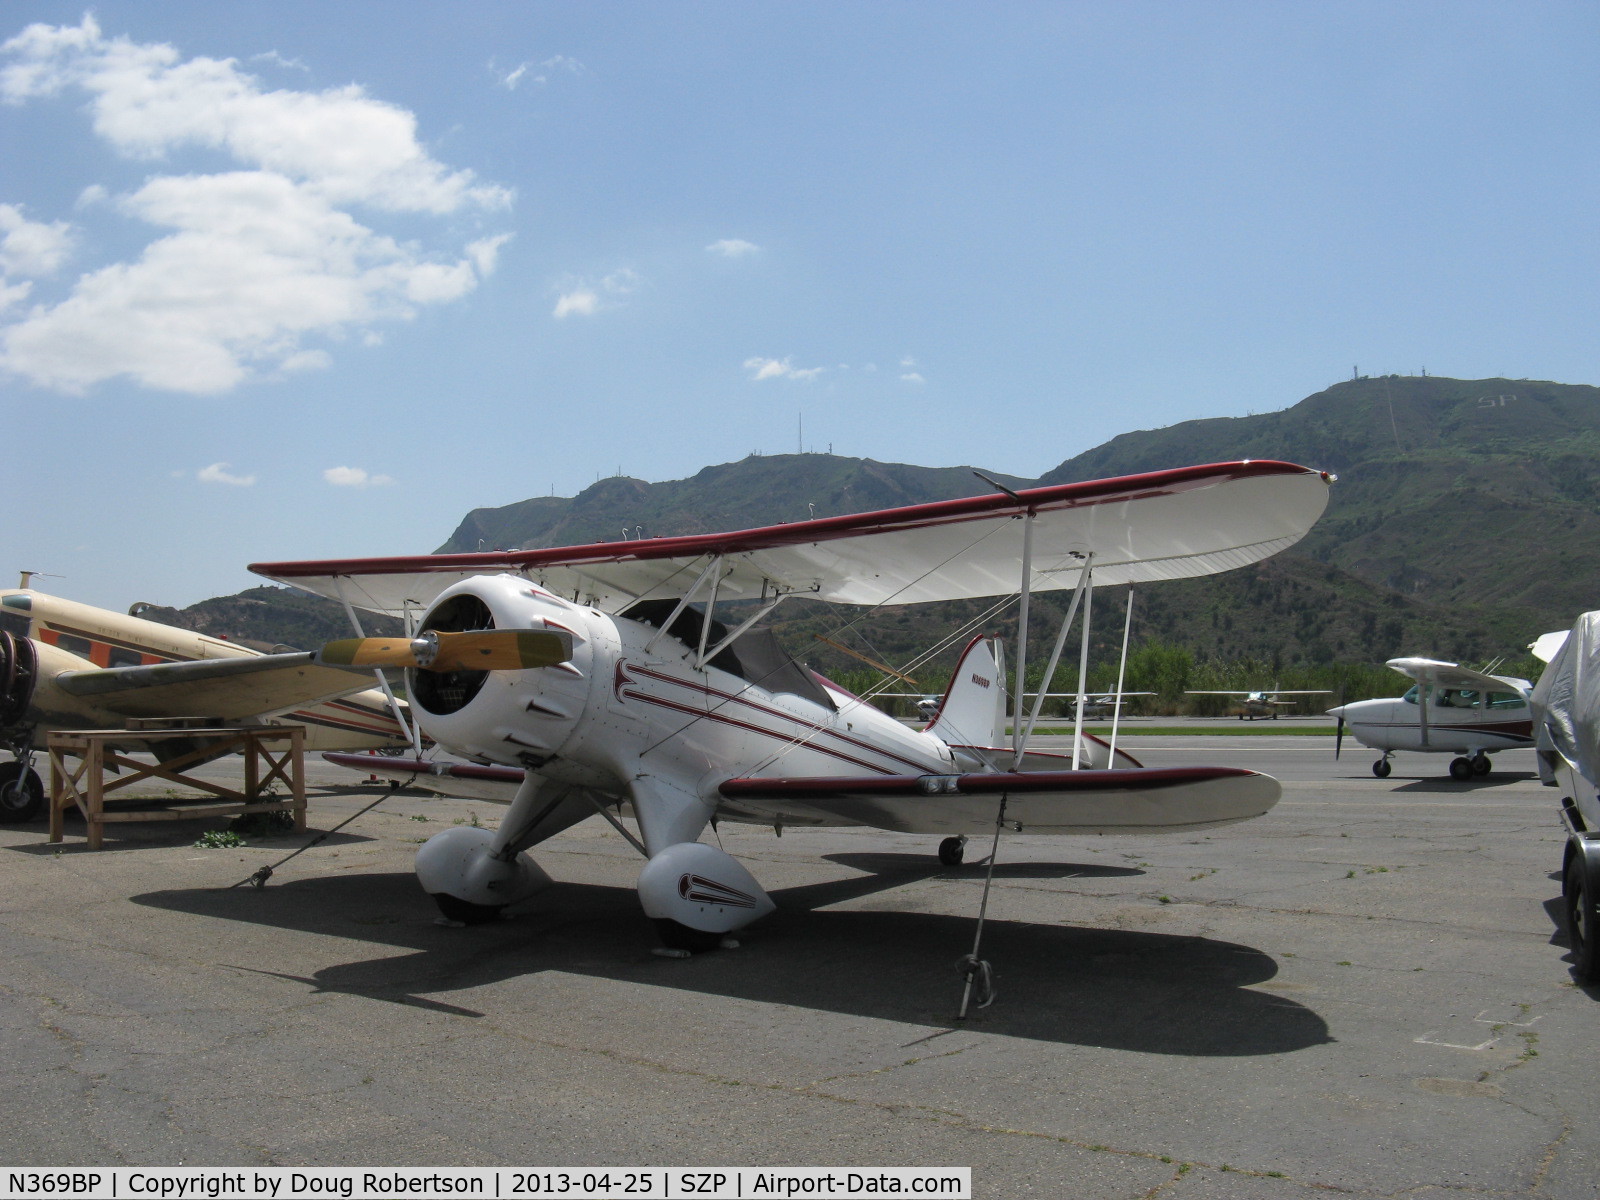 N369BP, 1987 Classic Aircraft Corp WACO YMF C/N F5-005, 1987 Classic Aircraft WACO YMF, Jacobs R755B 275 Hp radial, a stunning aircraft condition and appearance!